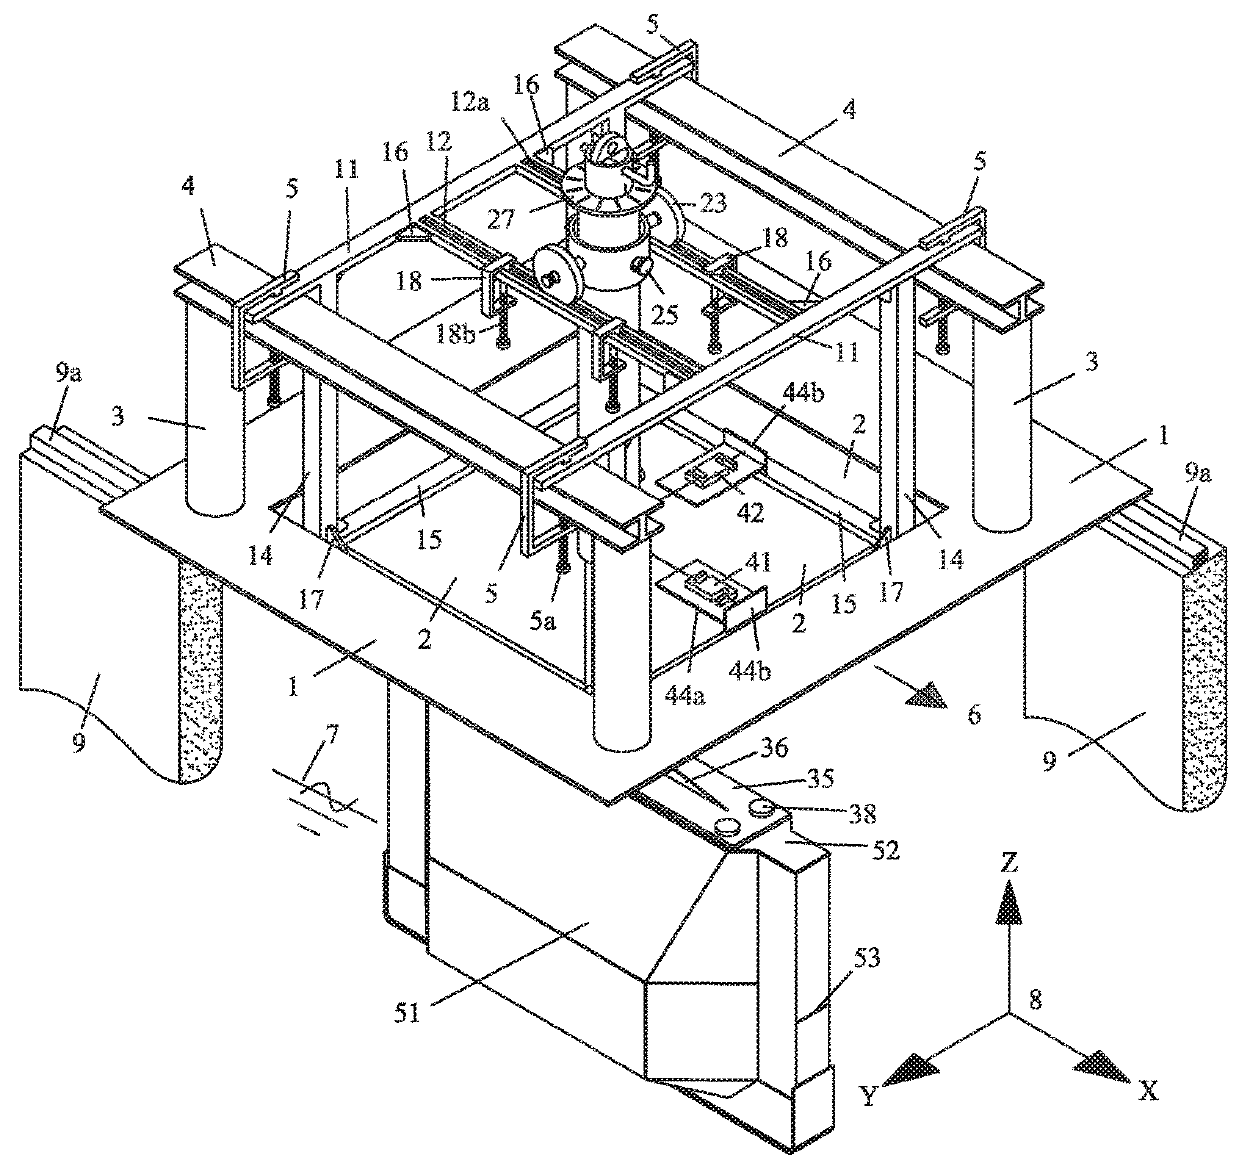 Testing device for model of floating gate and method of using the same